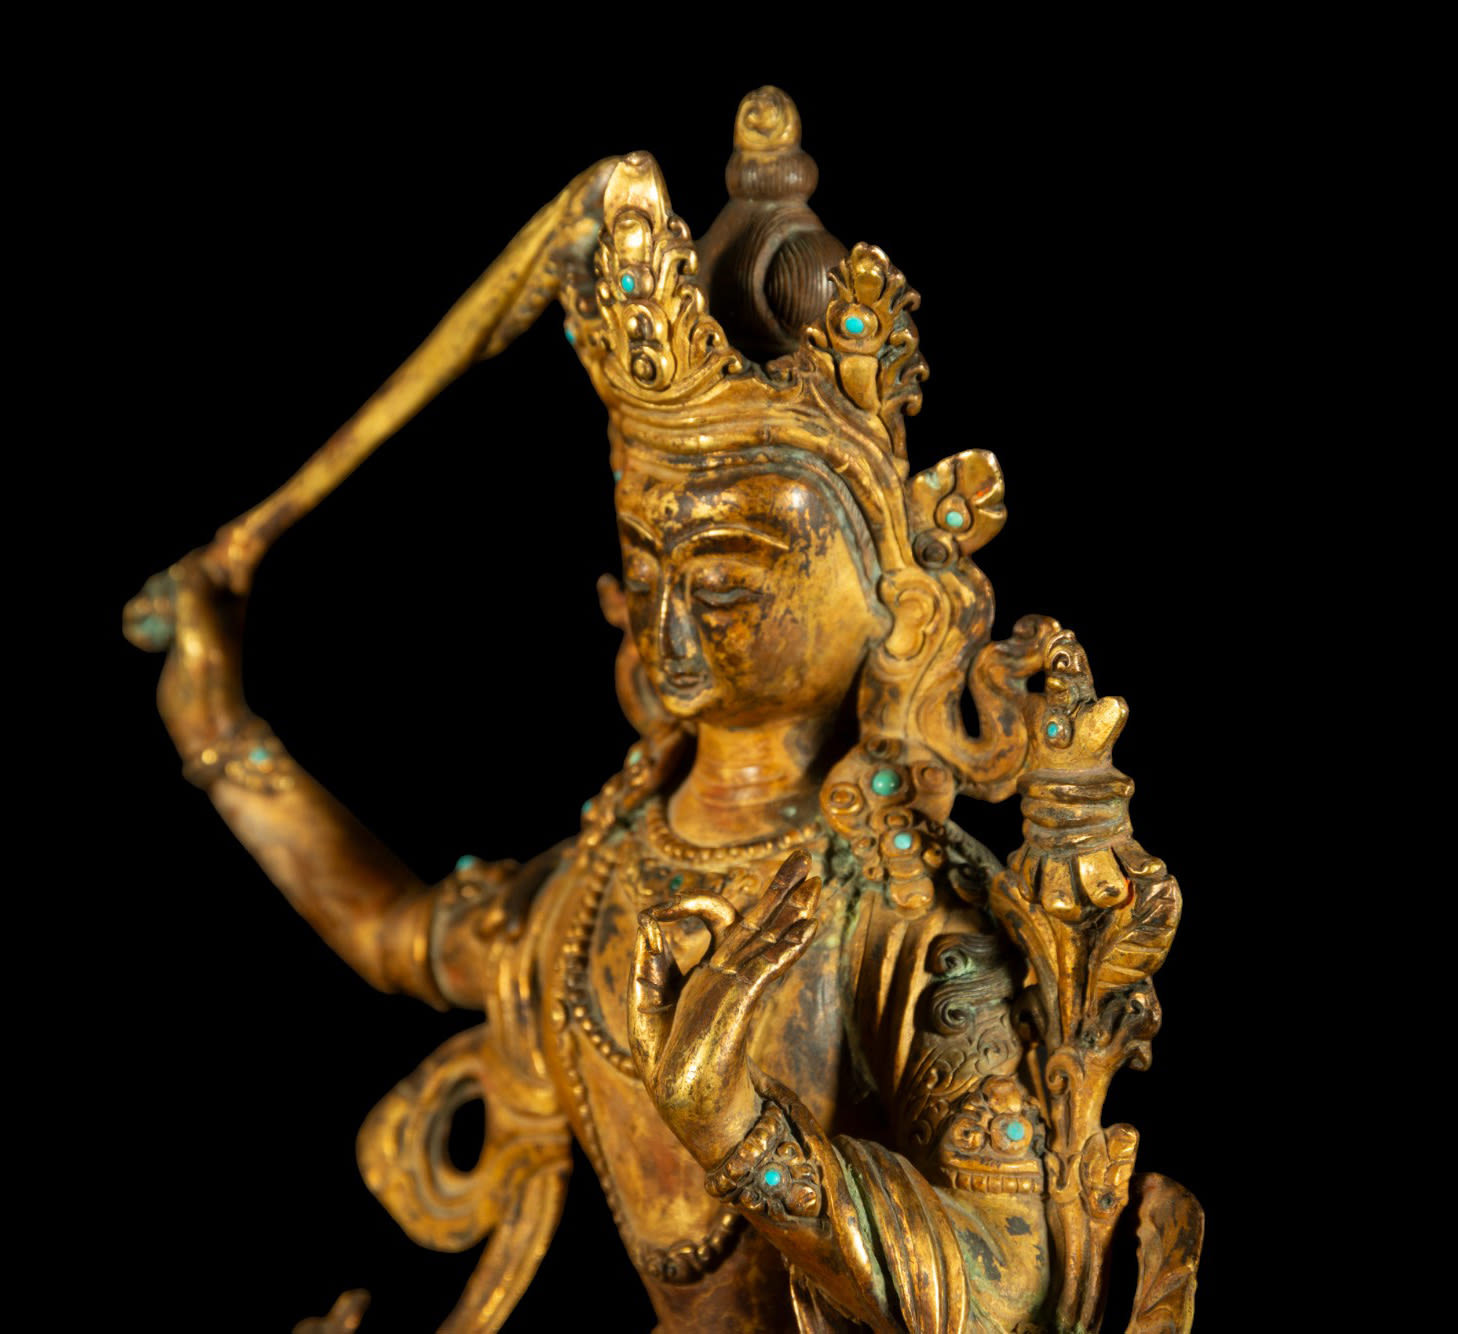 Exquisite Goddess Tara in gilt repoussé copper, Chinese school, Tibet, 19th century - Image 4 of 8